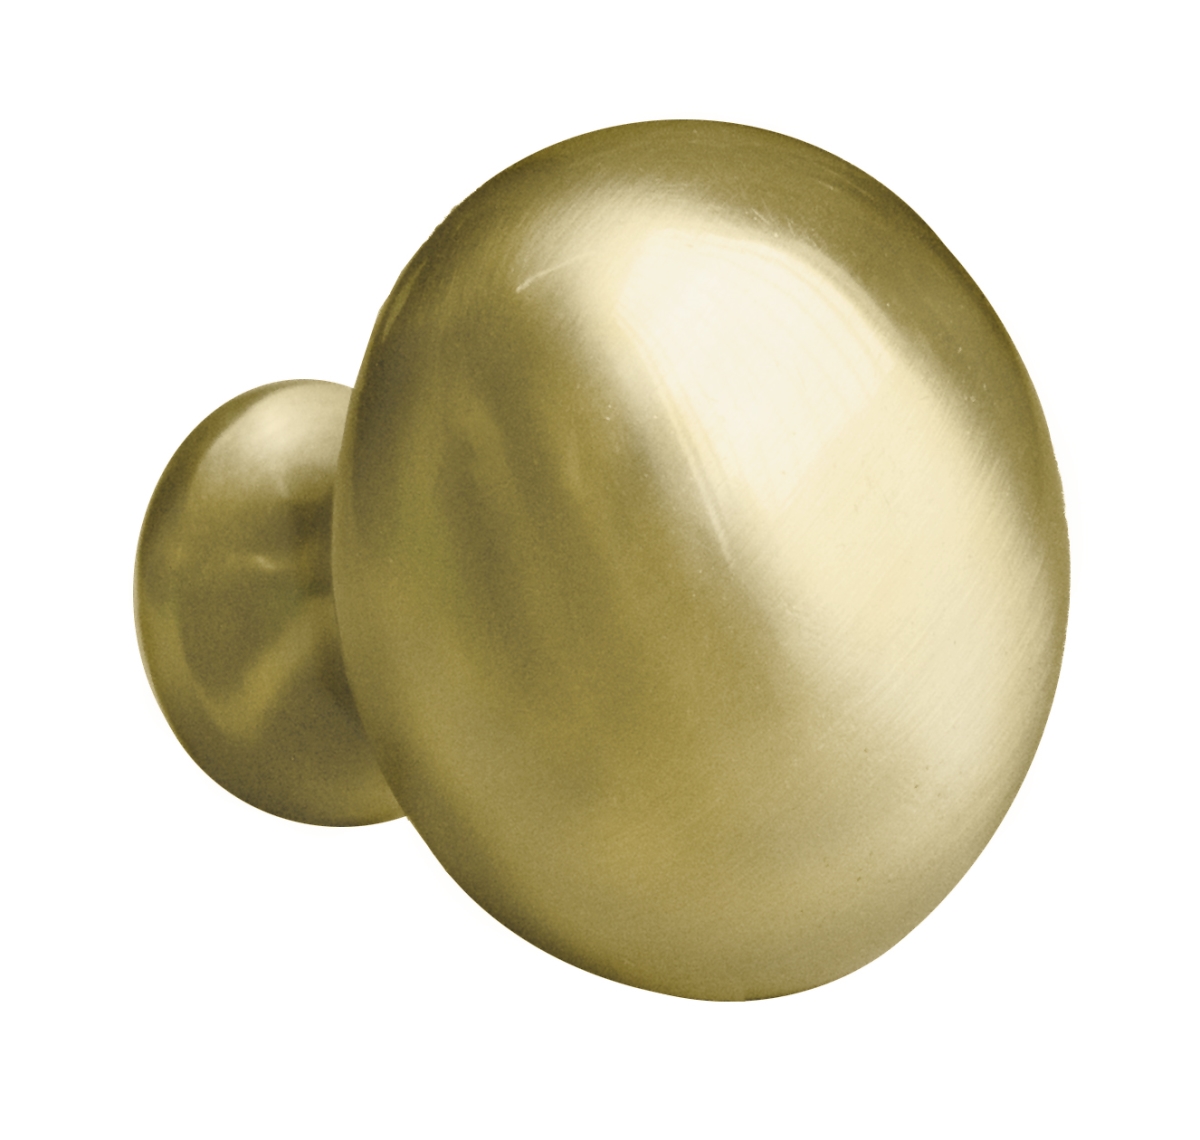 Ai-21412 1.25 In. Round Stainless Steel Cabinet Knob, Gold